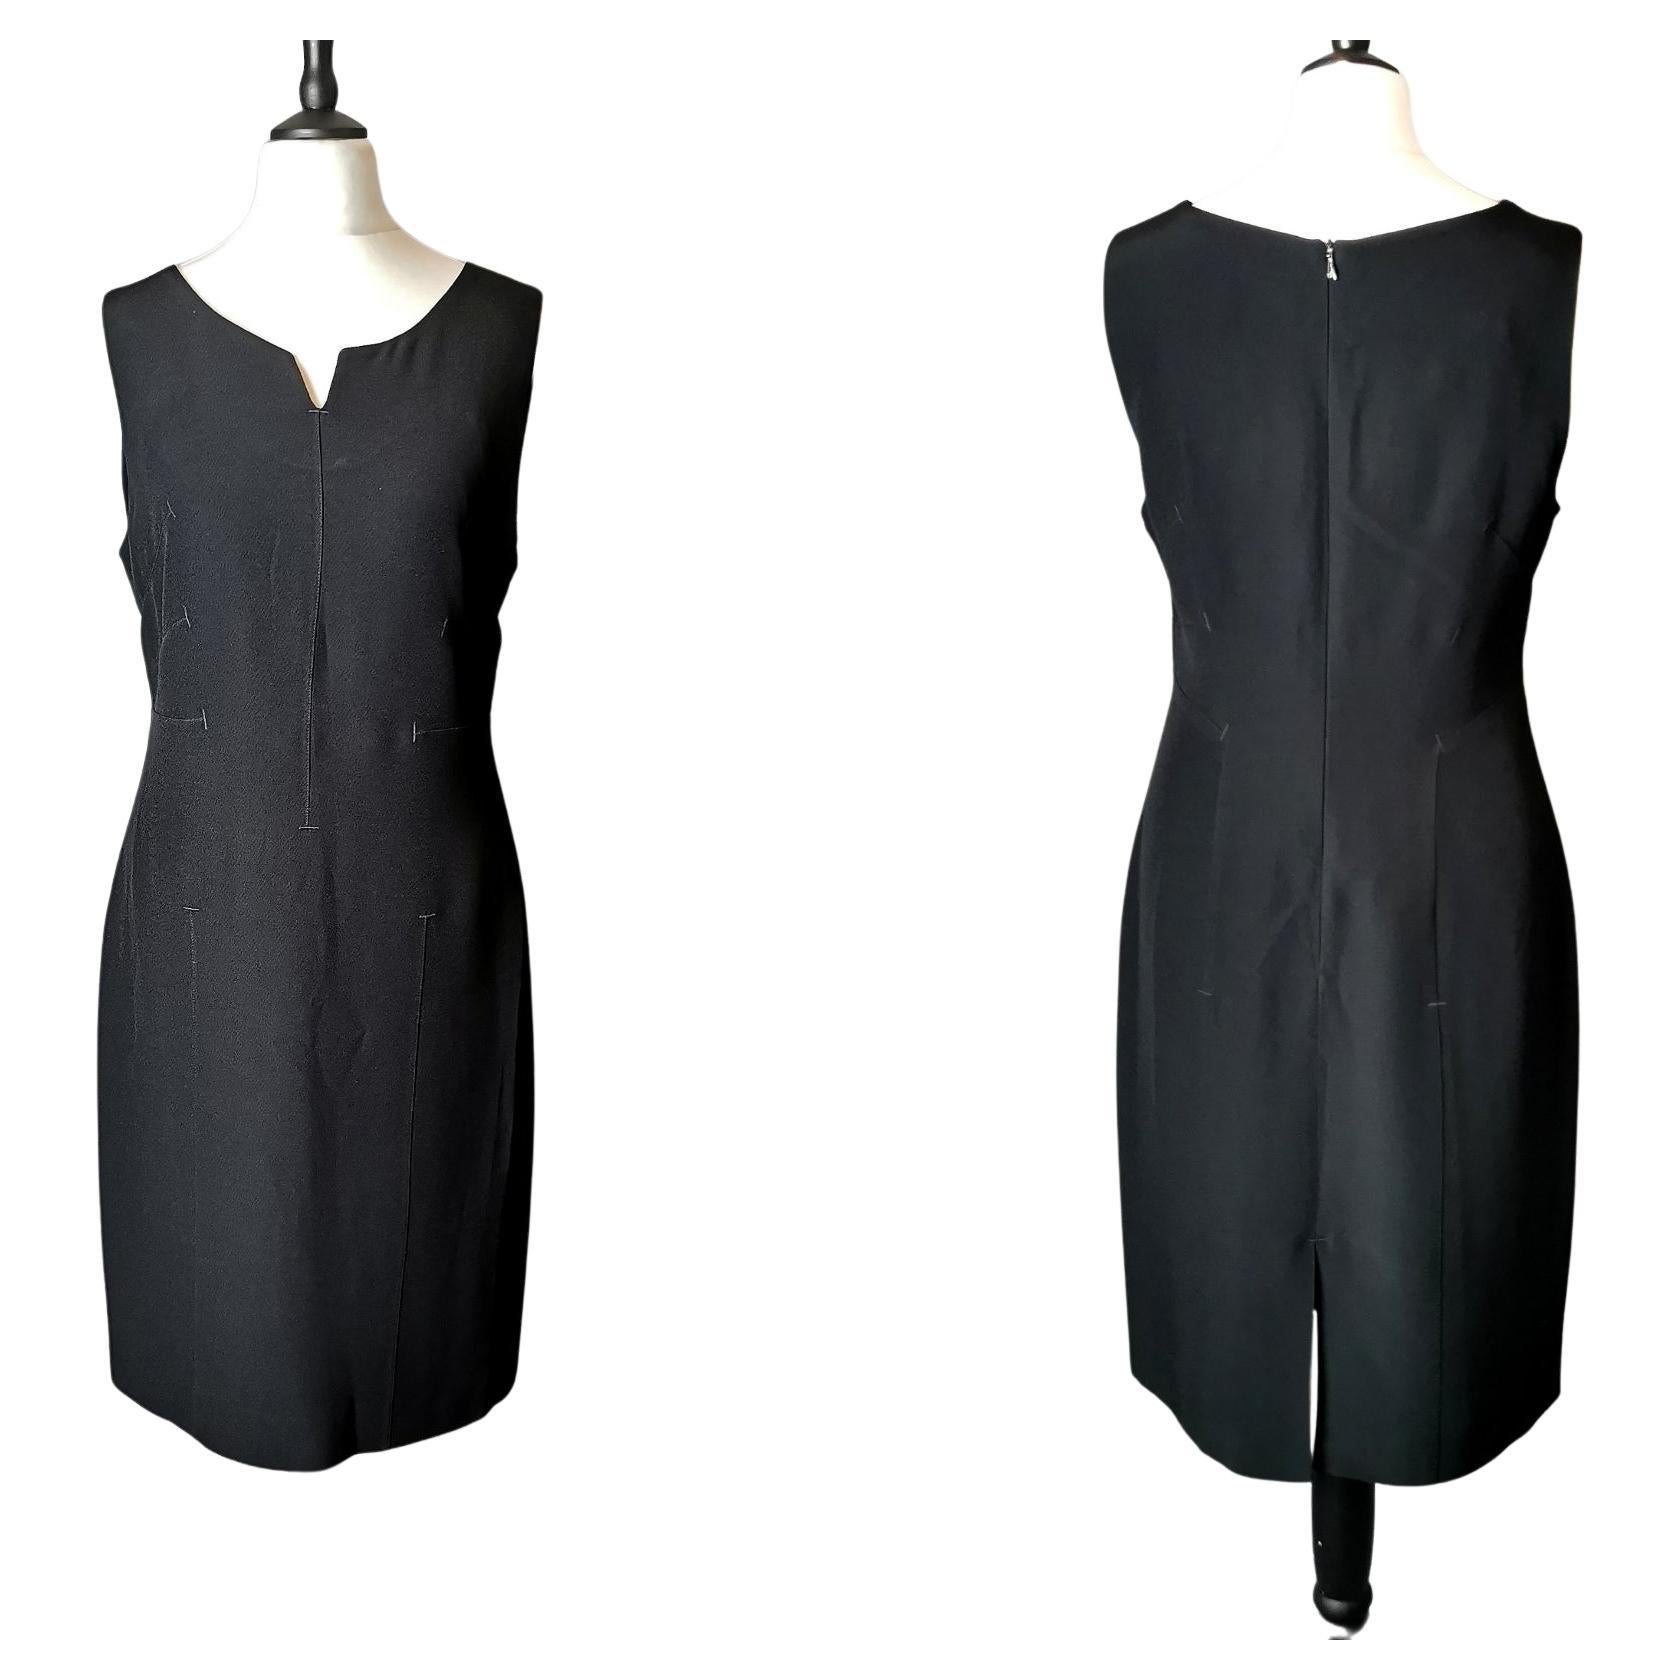 Moschino Cheap and Chic black sheath dress For Sale